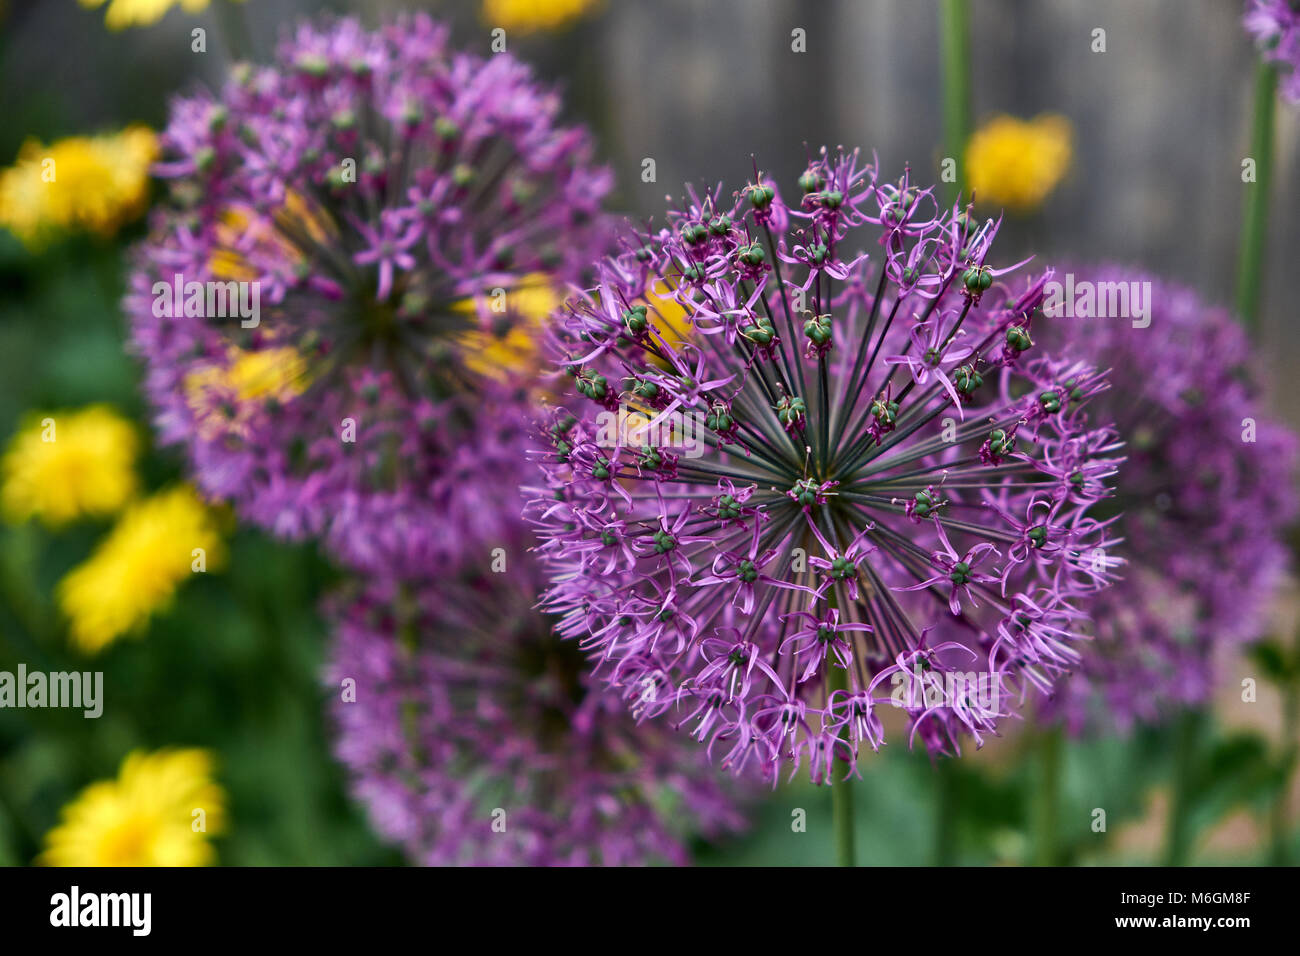 Macro photograph of purple allium flowers with star-shaped blossoms and green stems Stock Photo